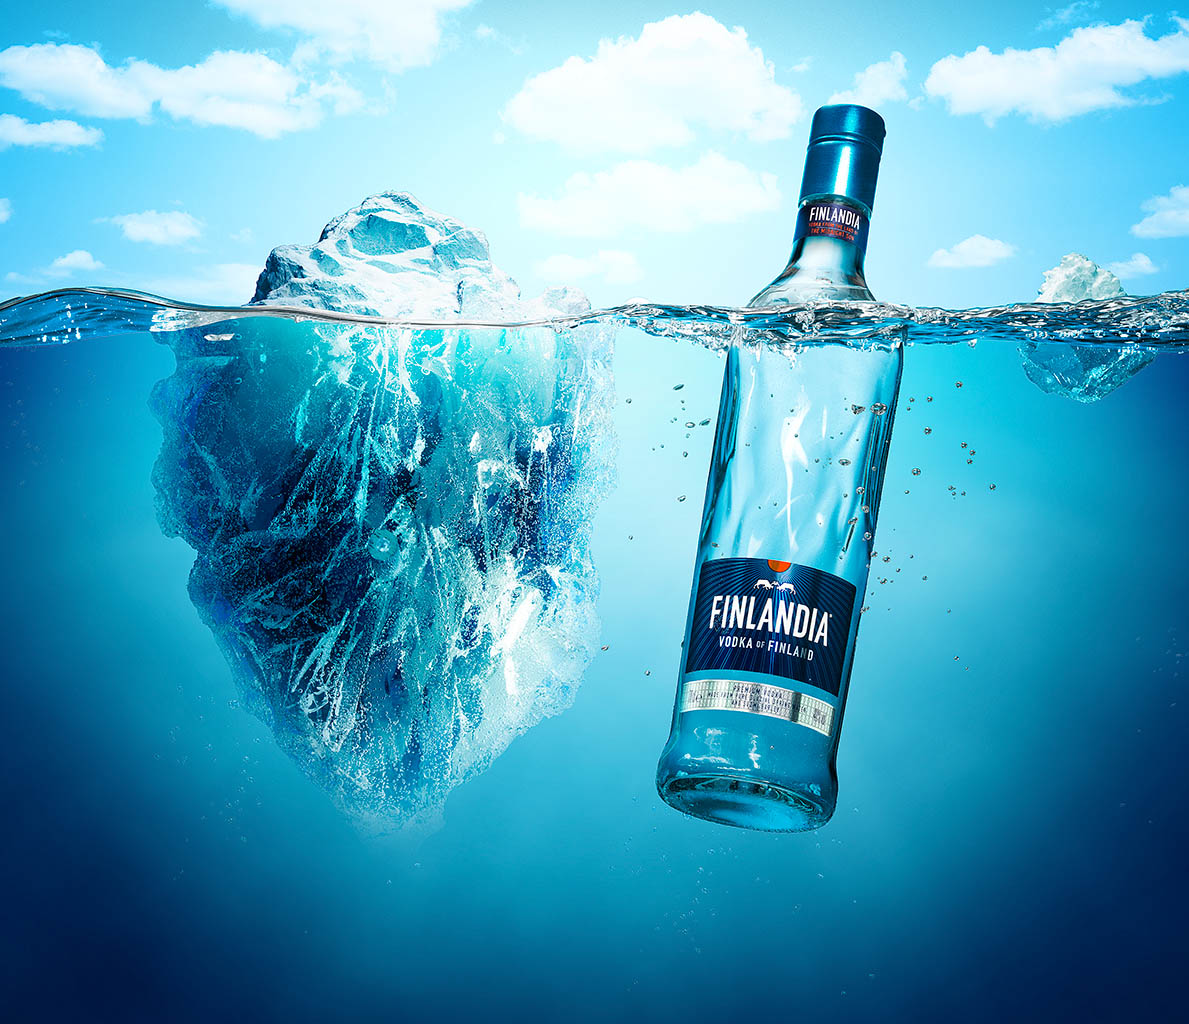 Advertising Still Life Product Photography of Finlandia vodka bottle by Packshot Factory